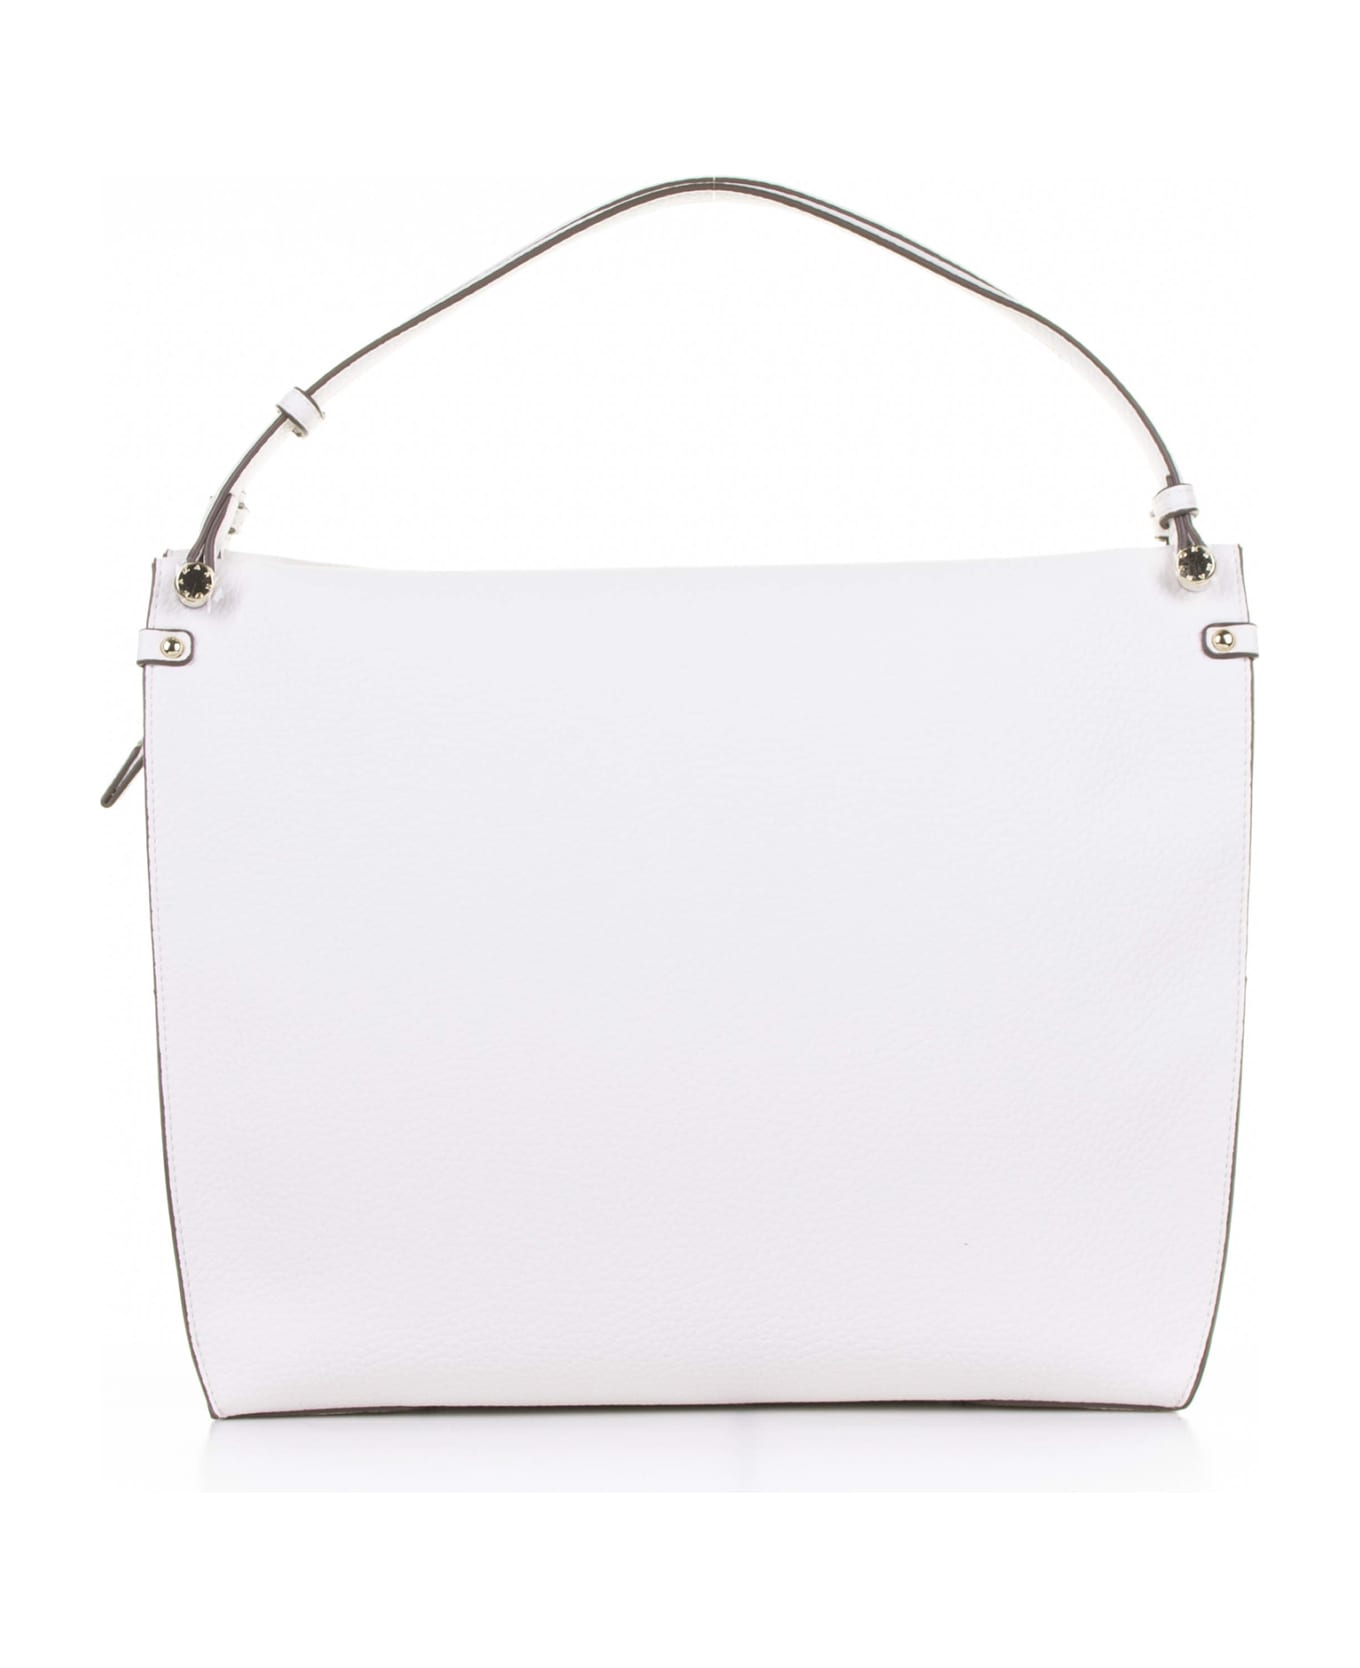 Ermanno Scervino White Petra Shopping Bag In Leather - BIANCO トートバッグ